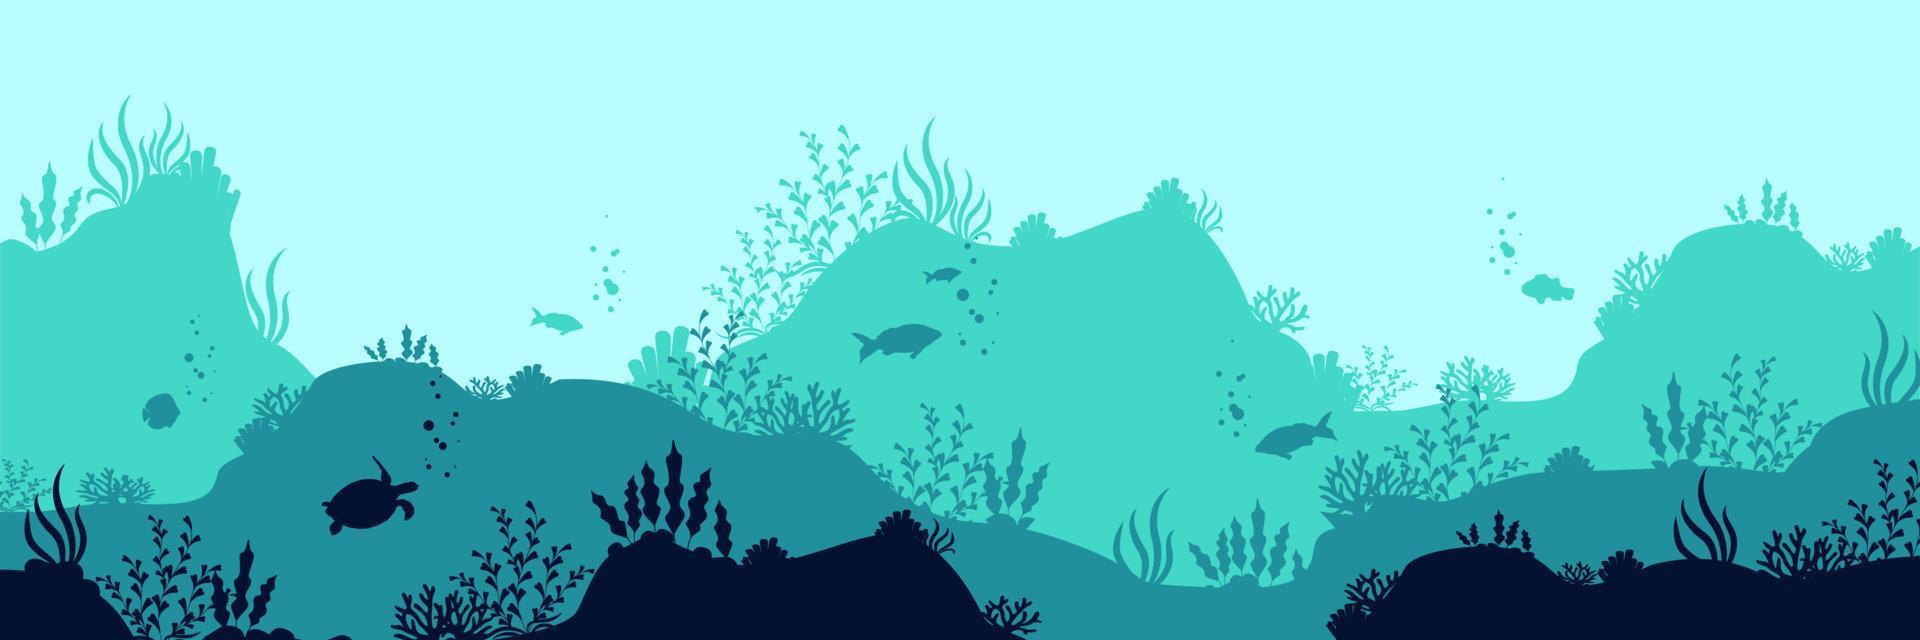 Oceanic deep world background. Dark underwater silhouettes swimming sea fish with blue outlines corals. vector